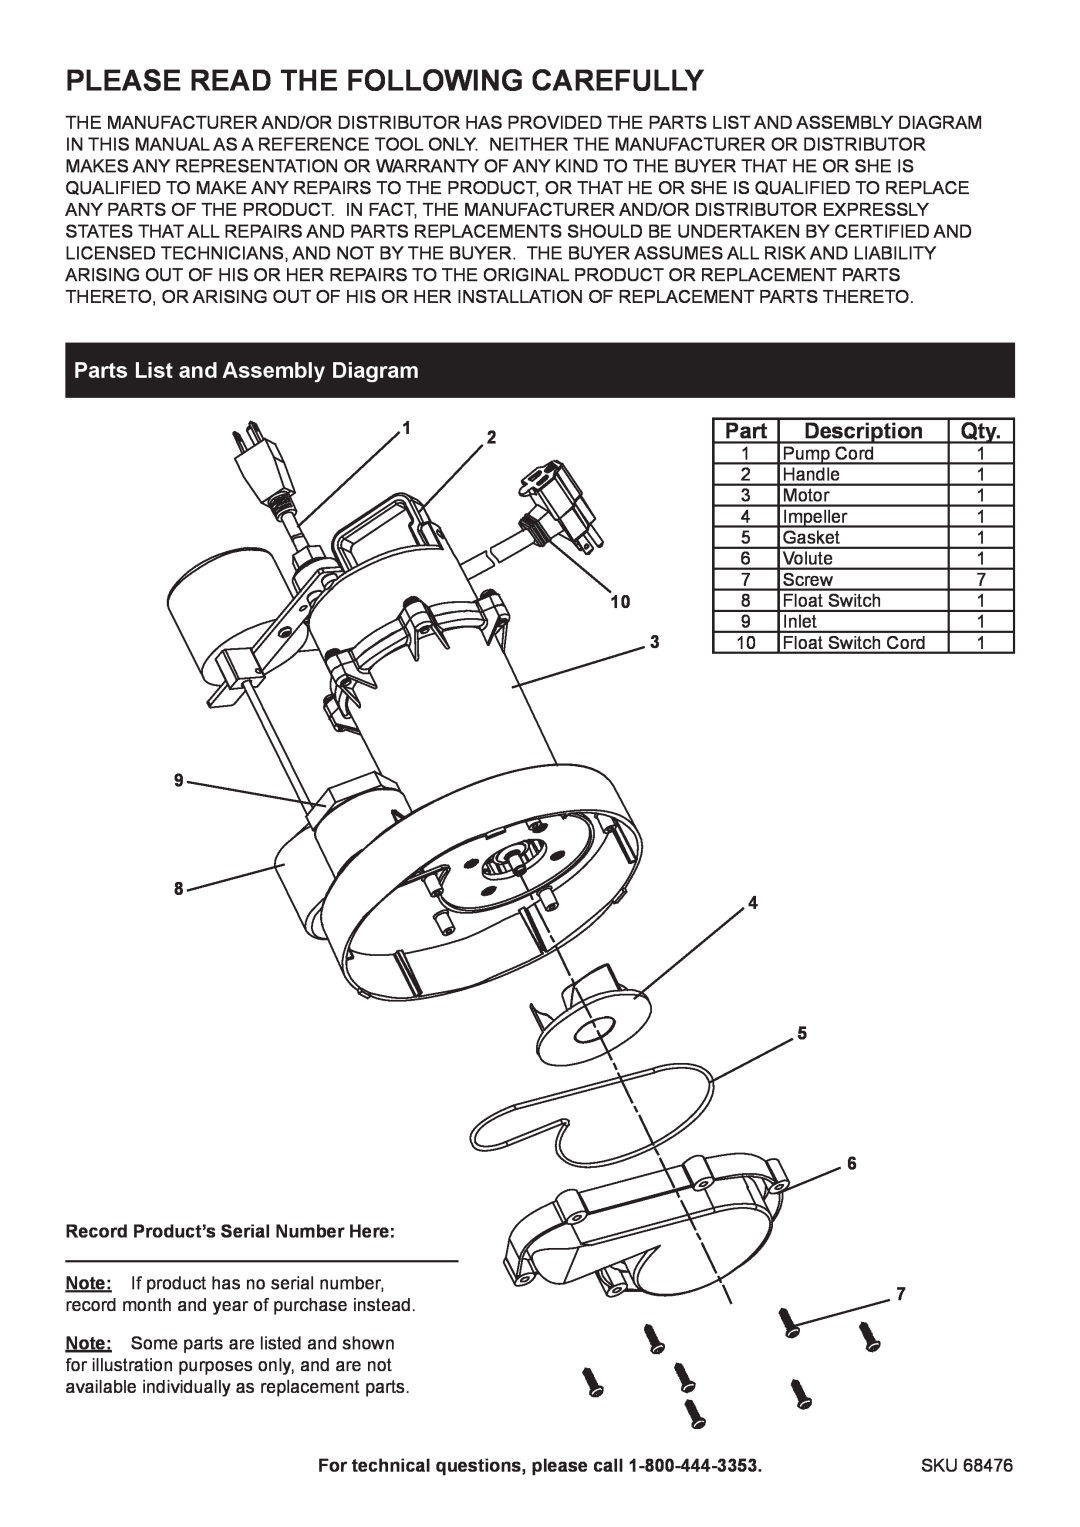 Harbor Freight Tools 68476 specifications Please Read The Following Carefully, Parts List and Assembly Diagram, Description 